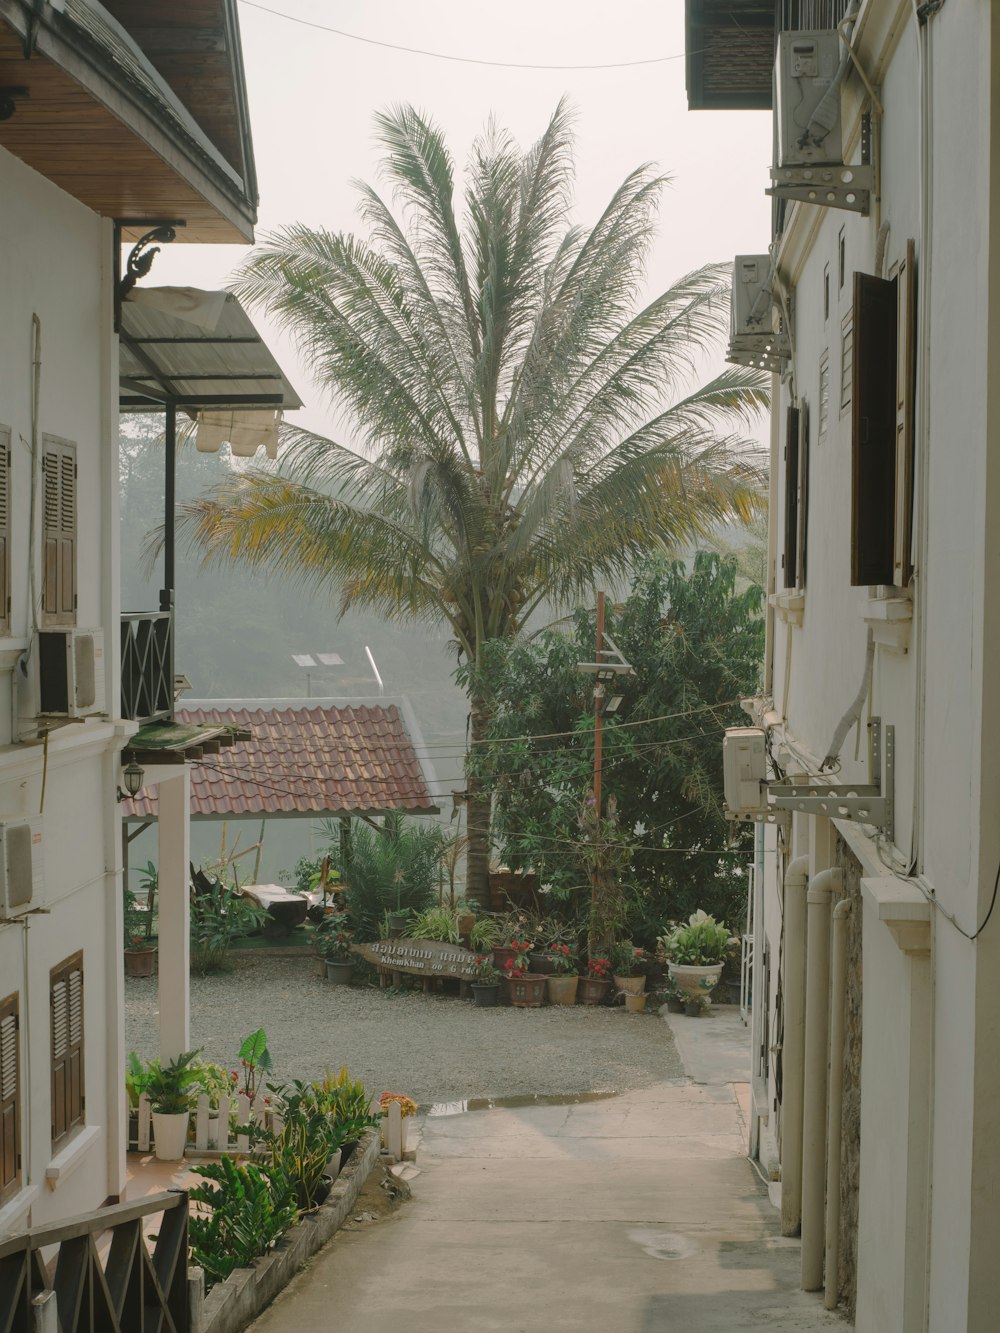 a narrow street with a palm tree in the distance